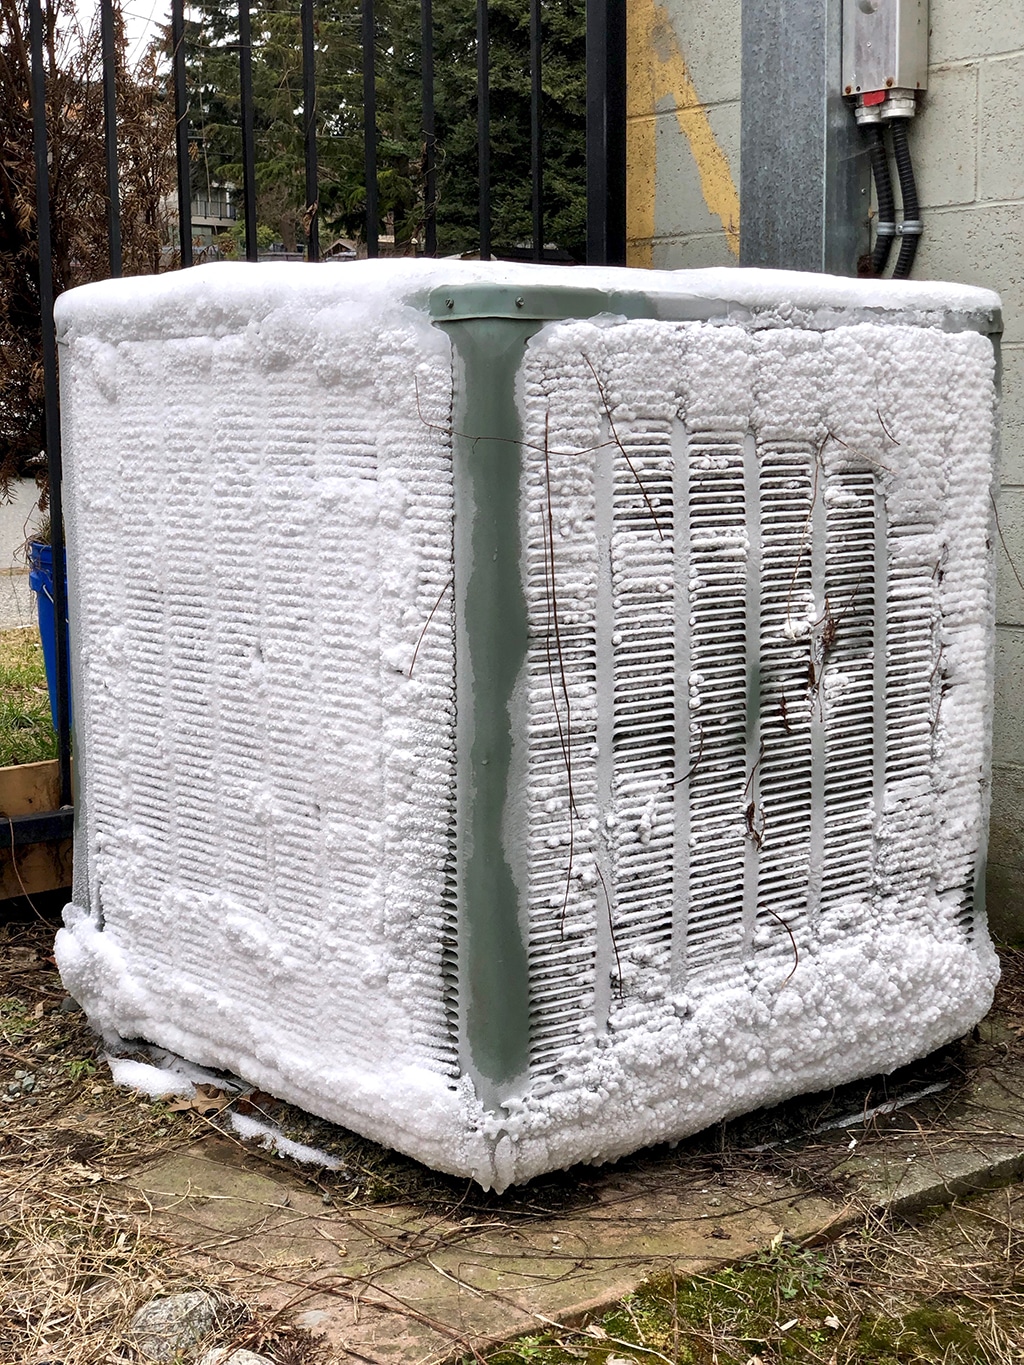 Your AC Repair Technician’s Opinion On Why Your AC Freezes | The Colony, TX